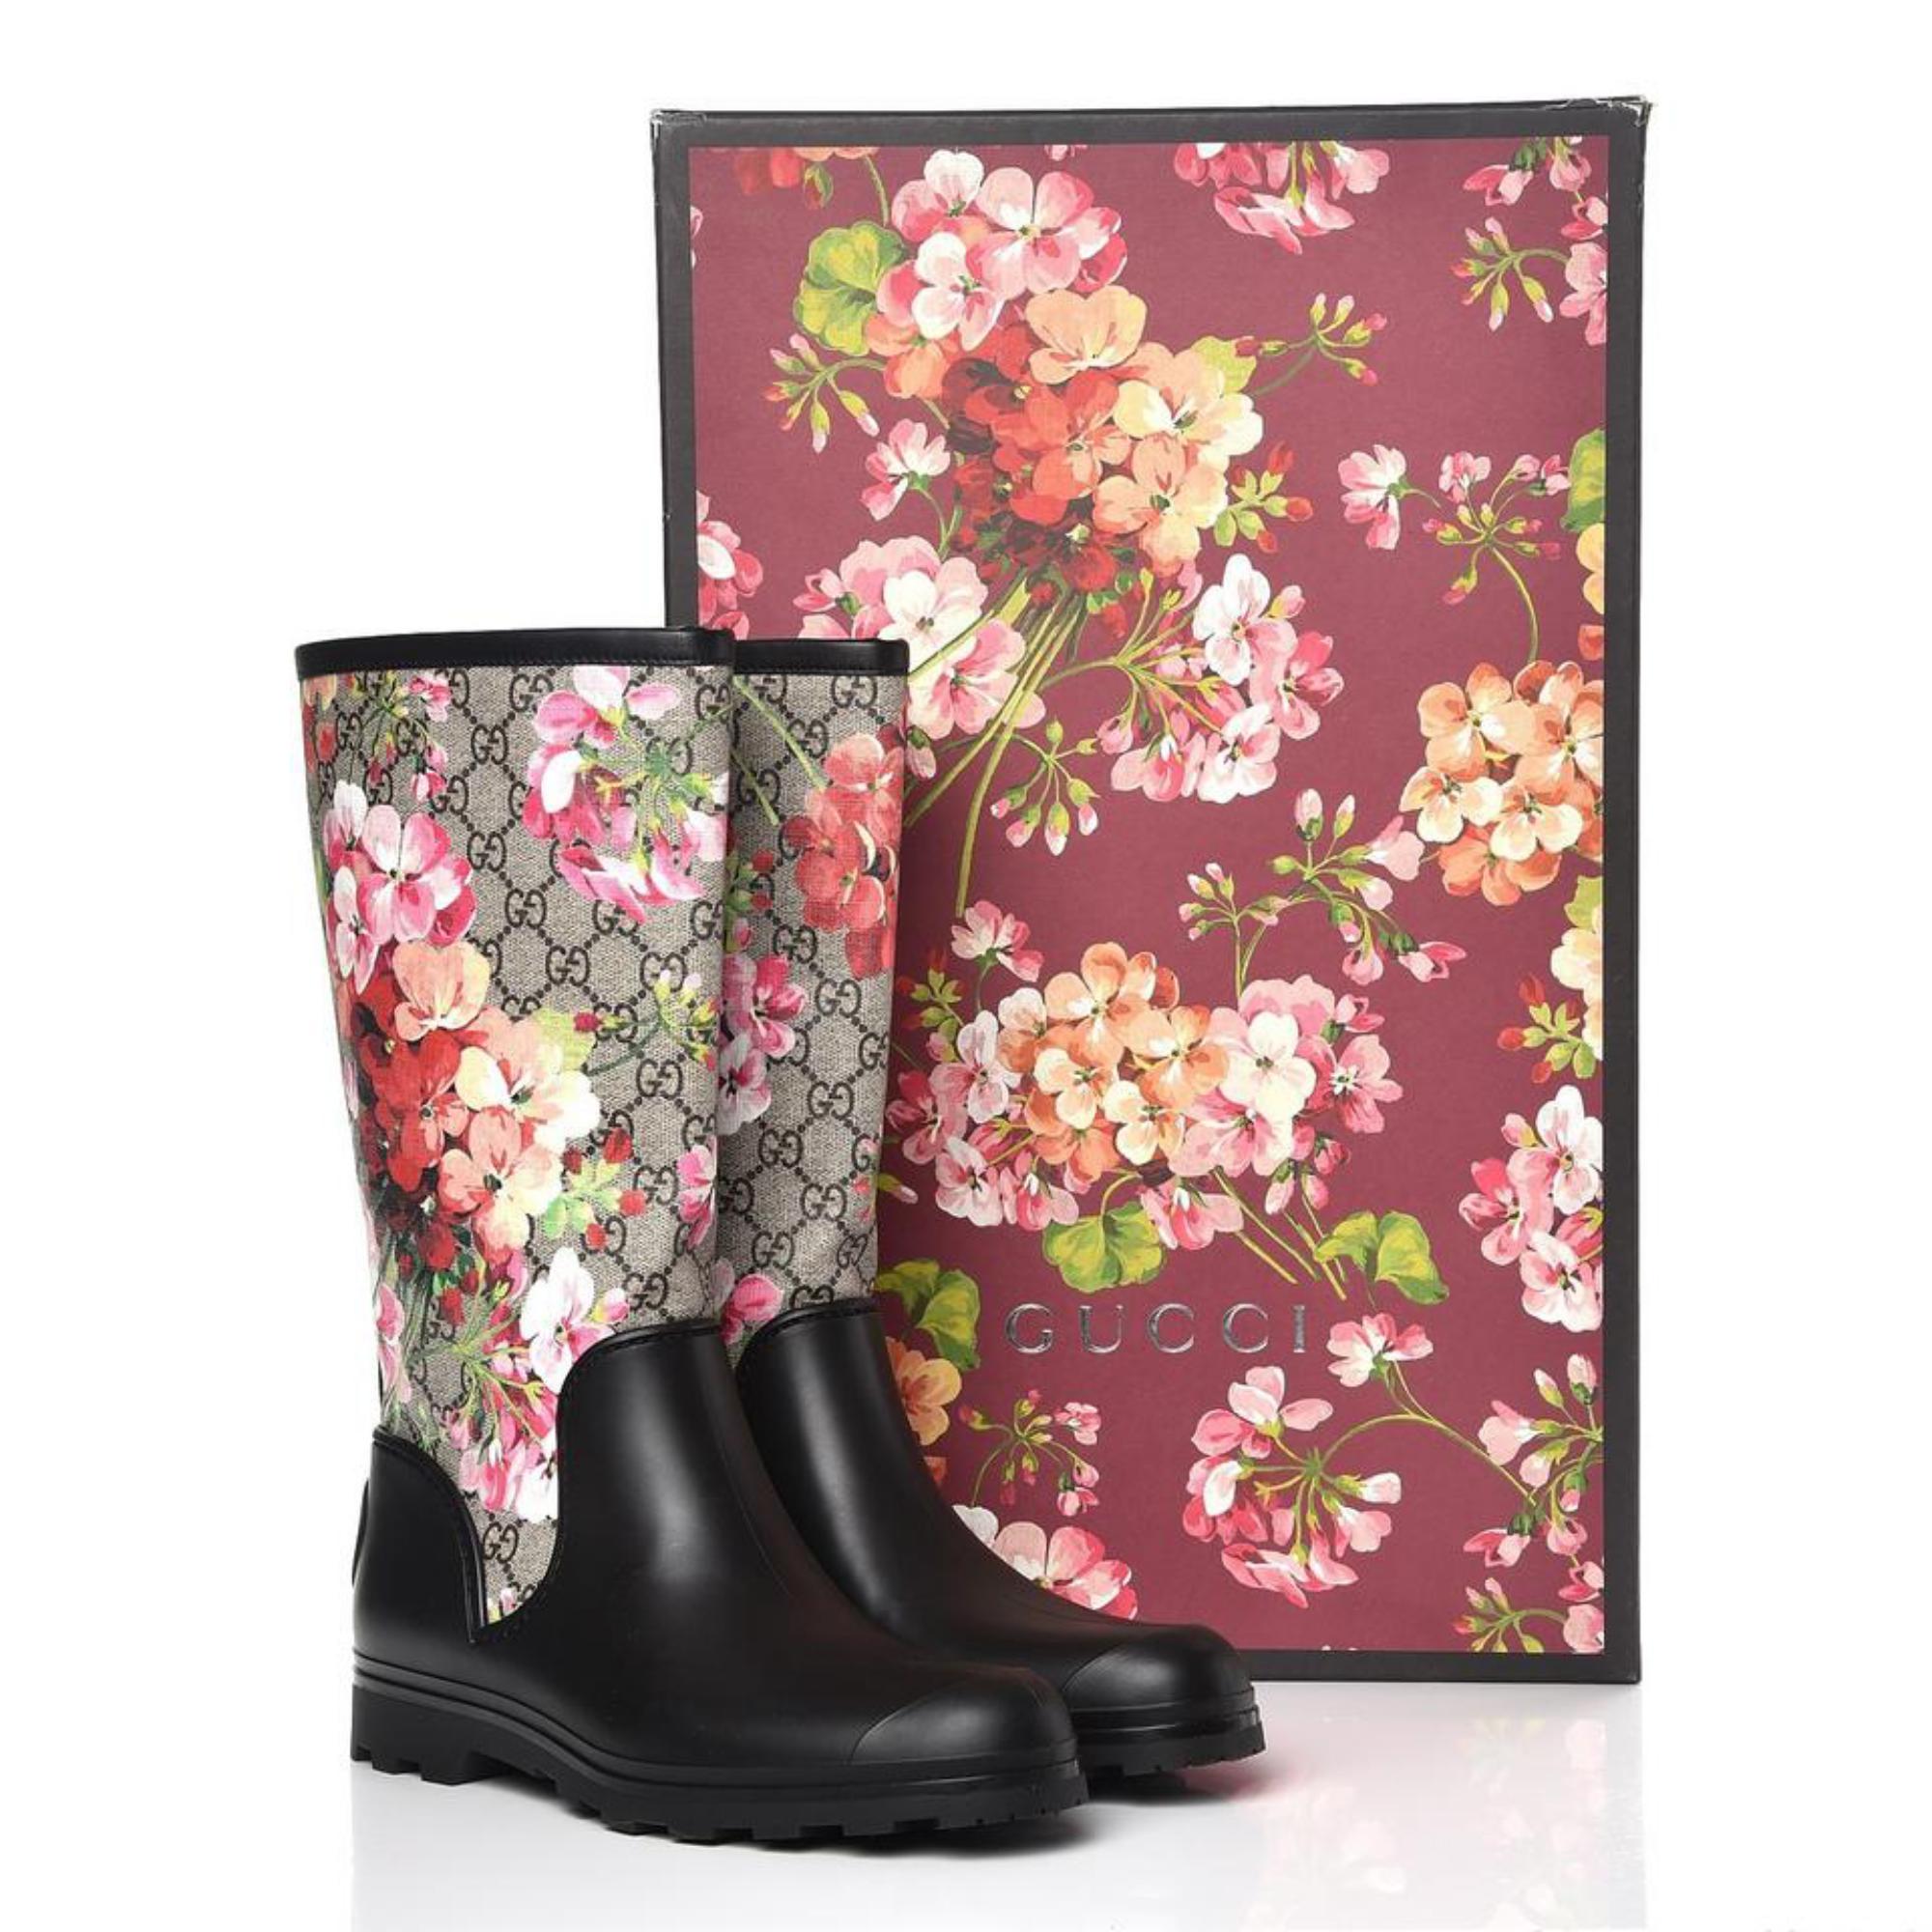 https://a.1stdibscdn.com/gucci-black-limited-supreme-prato-gg-blooms-rain-boots-booties-24684511-for-sale/v_14632/1558608577586/gucci_black_limited_edition_floral_supreme_prato_gg_blooms_rain_bootsbooties_size_eu_39_approx_us_9_0_2_960_960_master.jpg